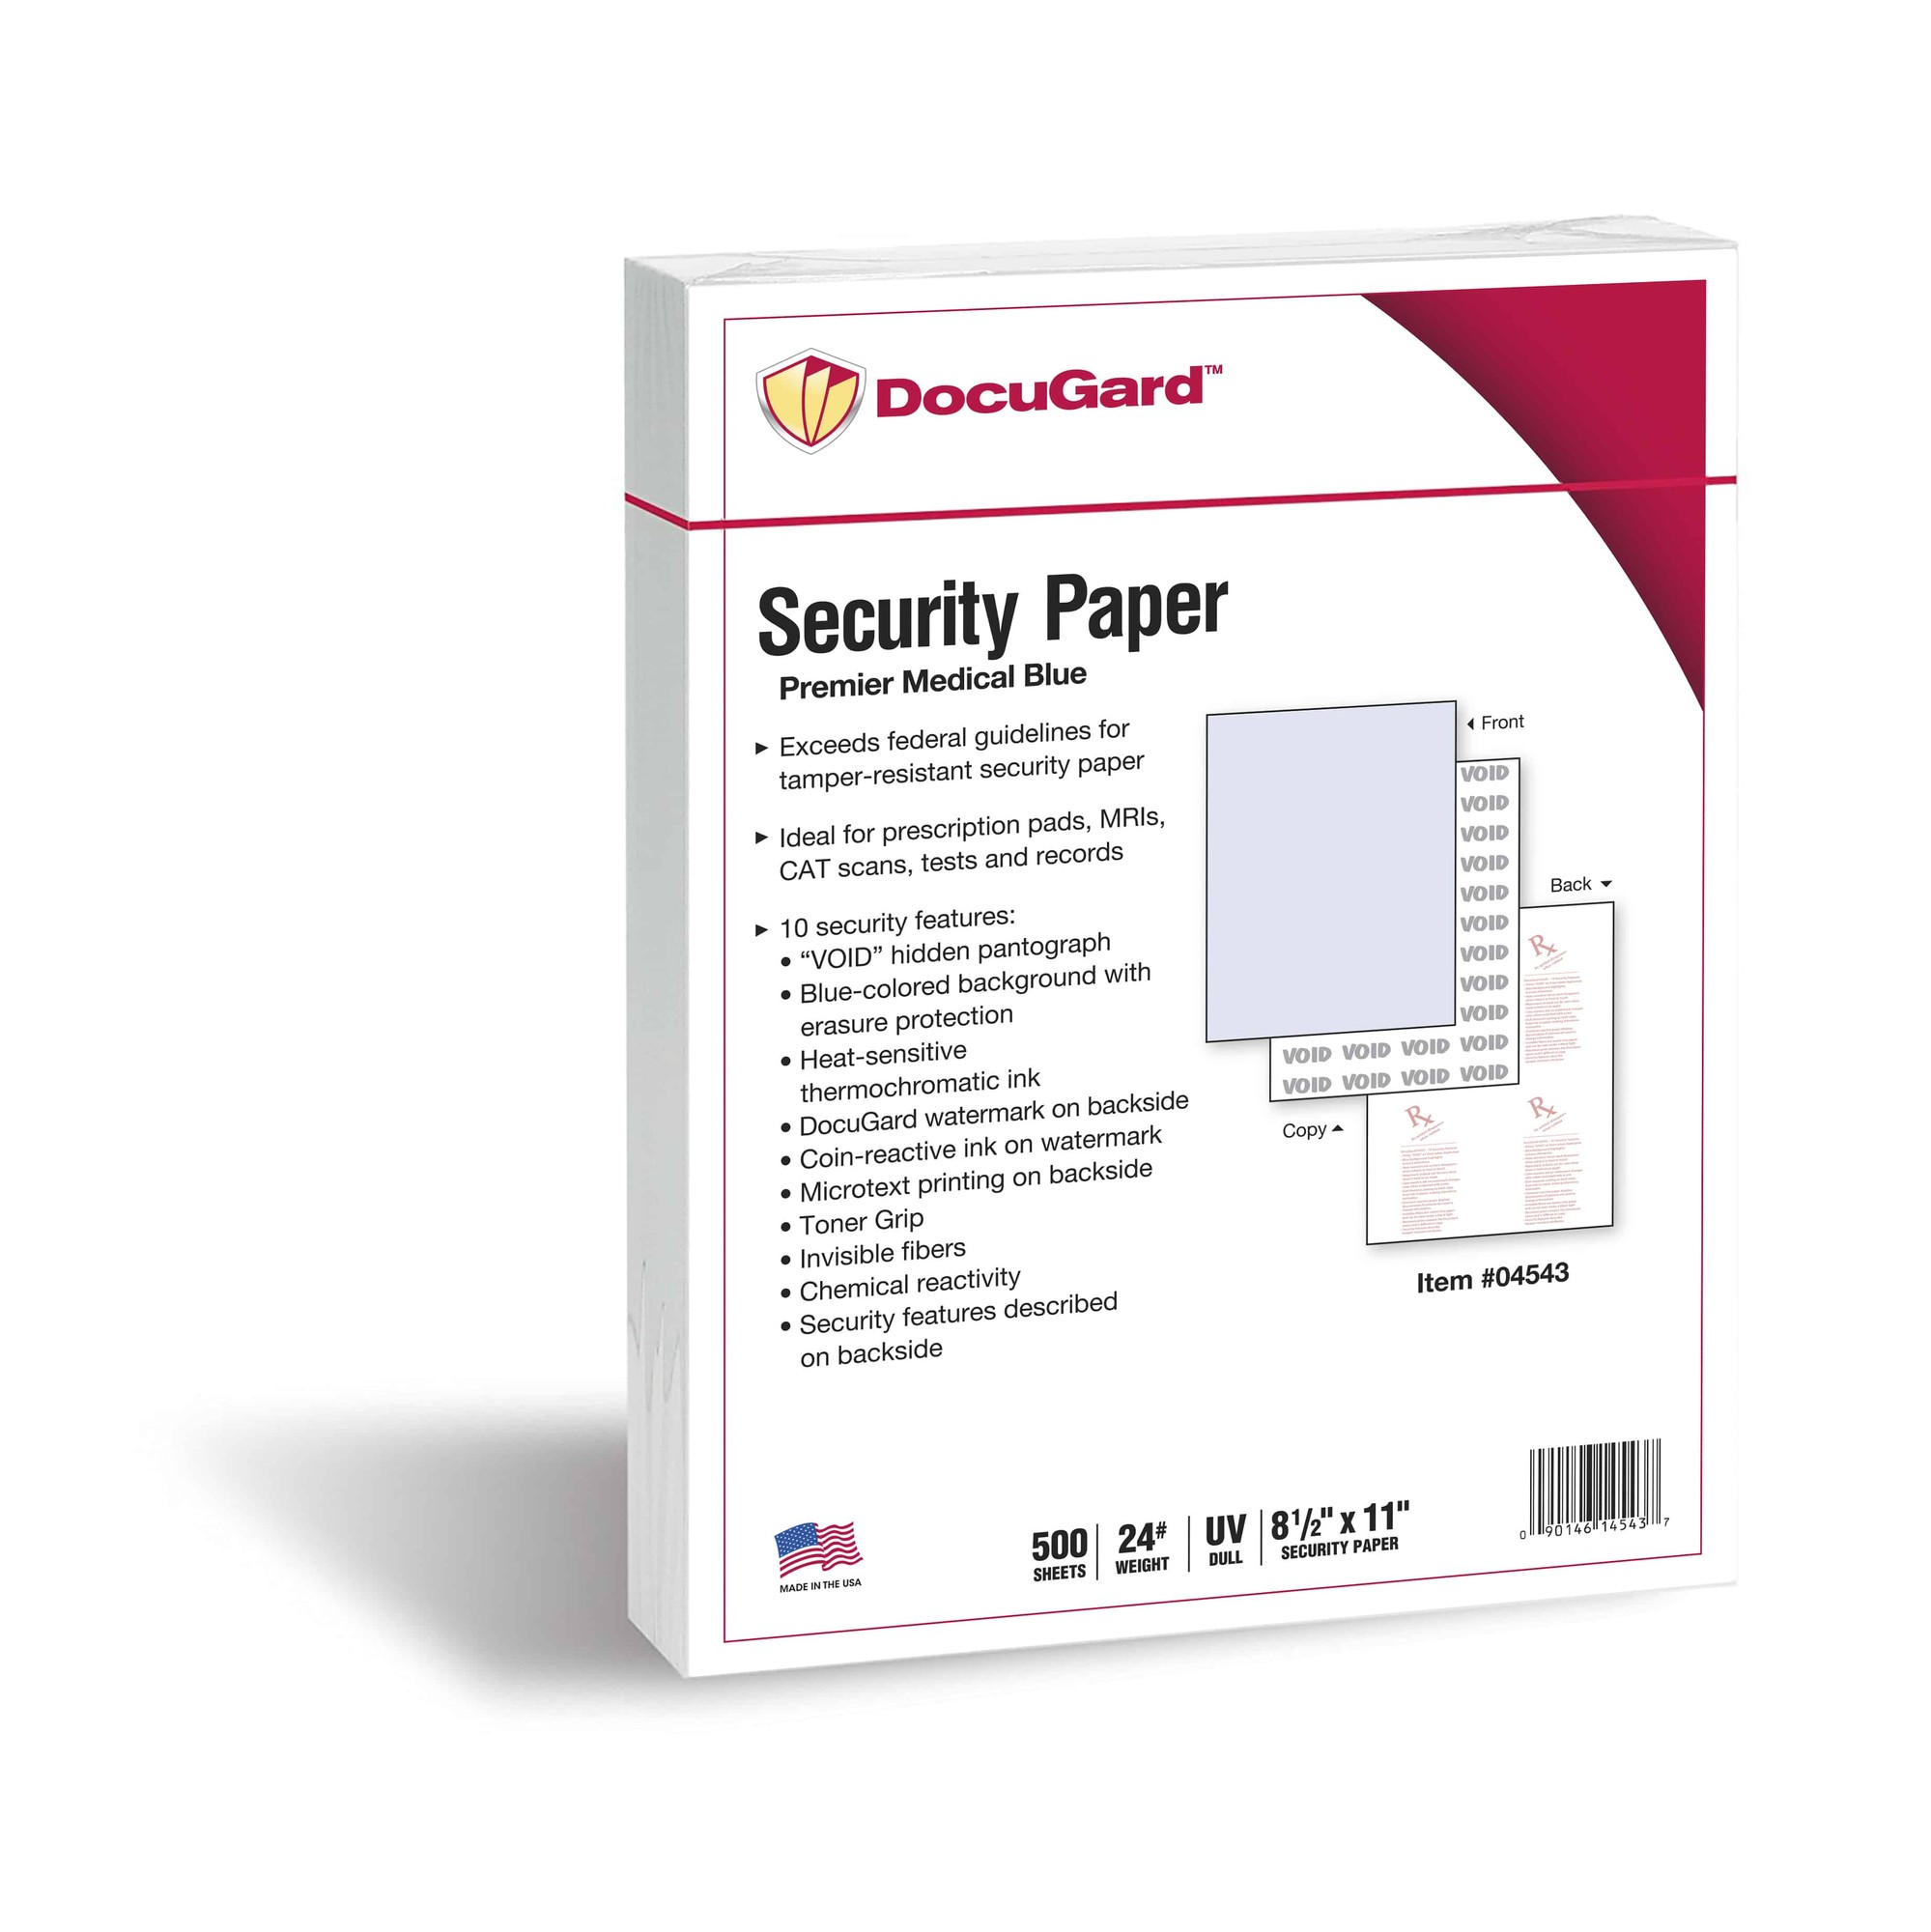 DocuGard Premier Security Paper for Printing Prescriptions & Preventing Fraud, 10 Features - Letter - 8 1/2" x 11" - 24 lb Basis